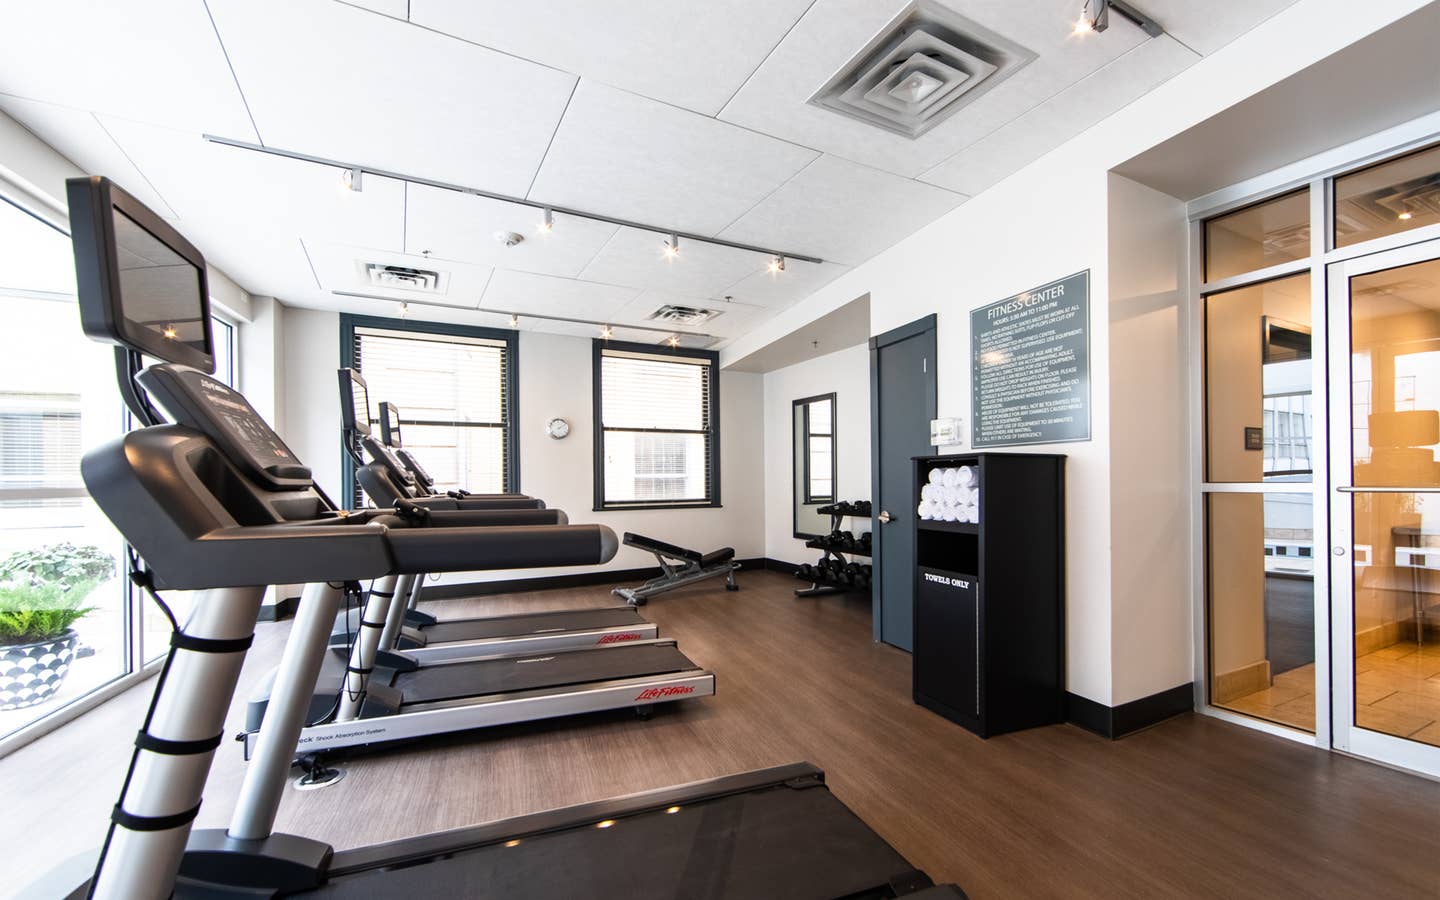 Fitness center with treadmills and free weights at New Orleans Resort in Louisiana.